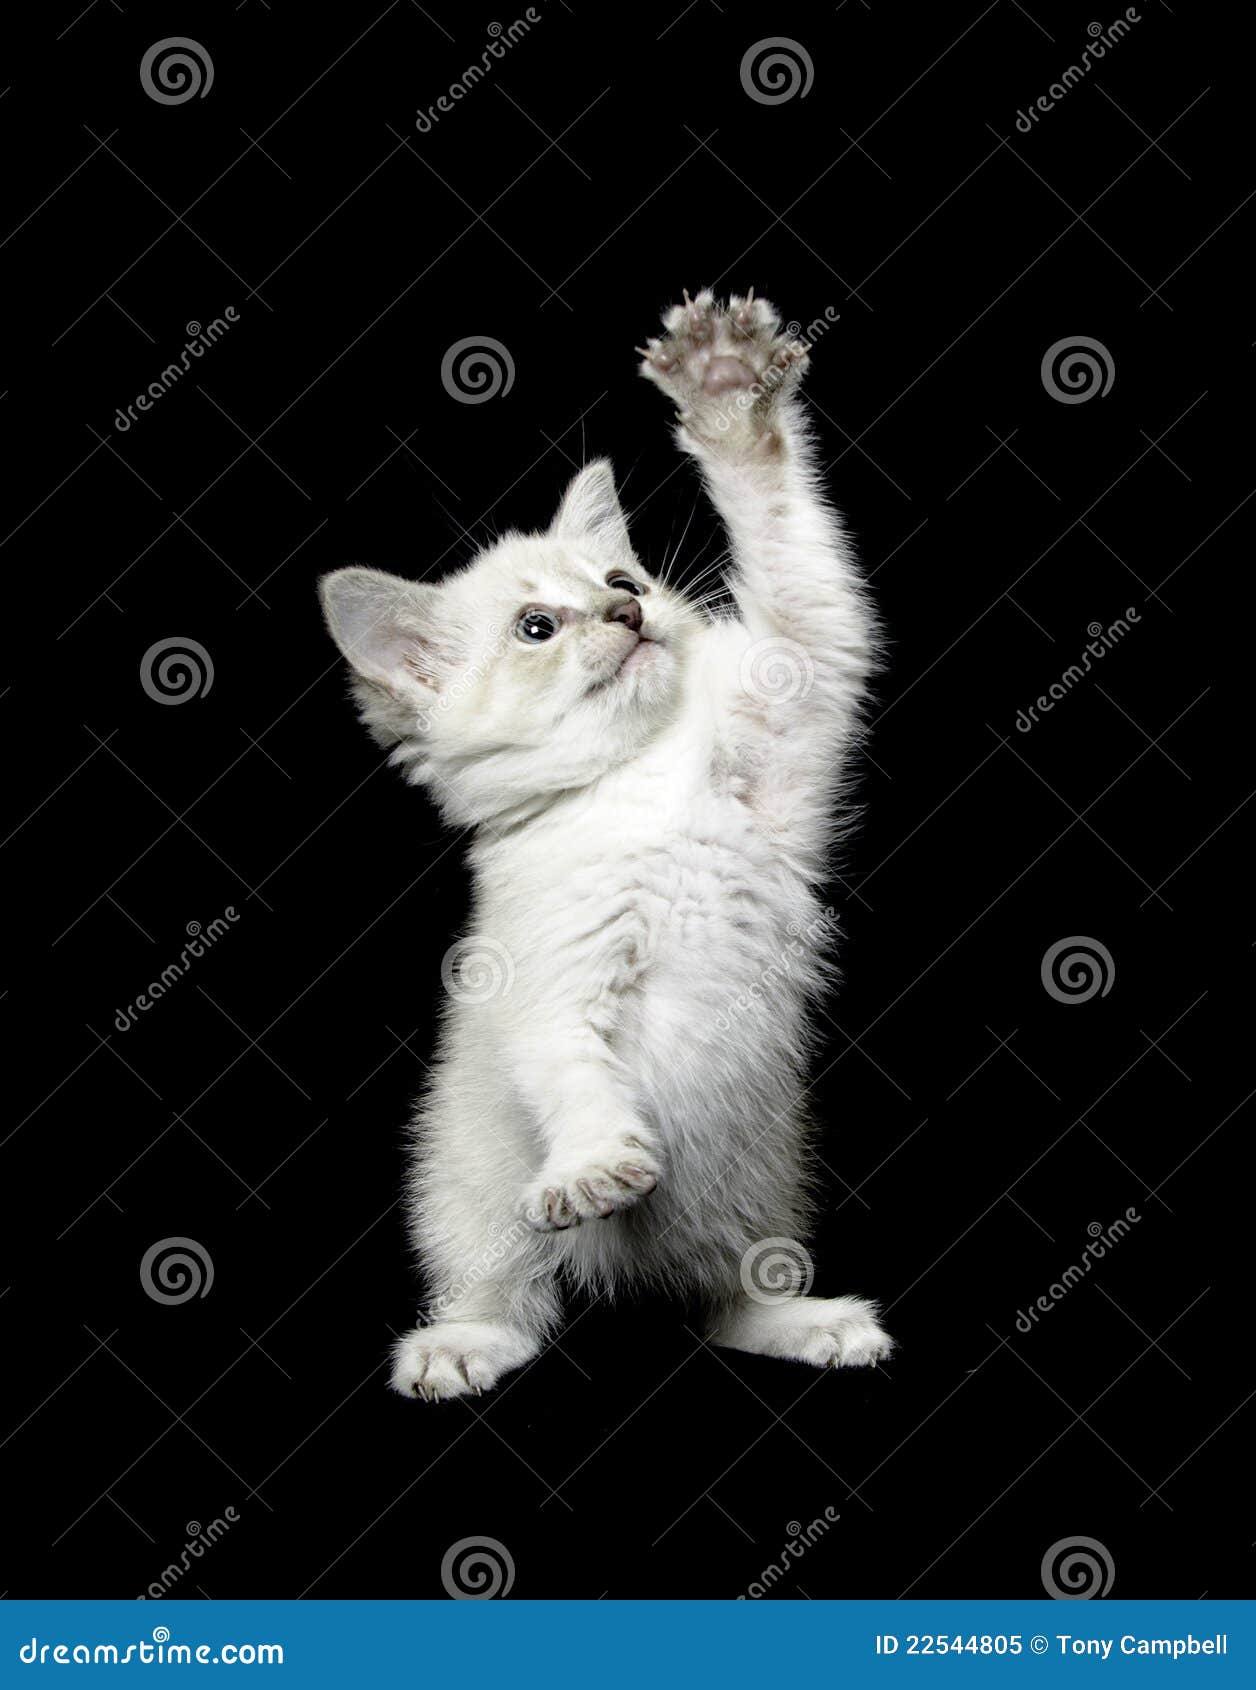 62 233 Black Cute Kitten White Photos Free Royalty Free Stock Photos From Dreamstime